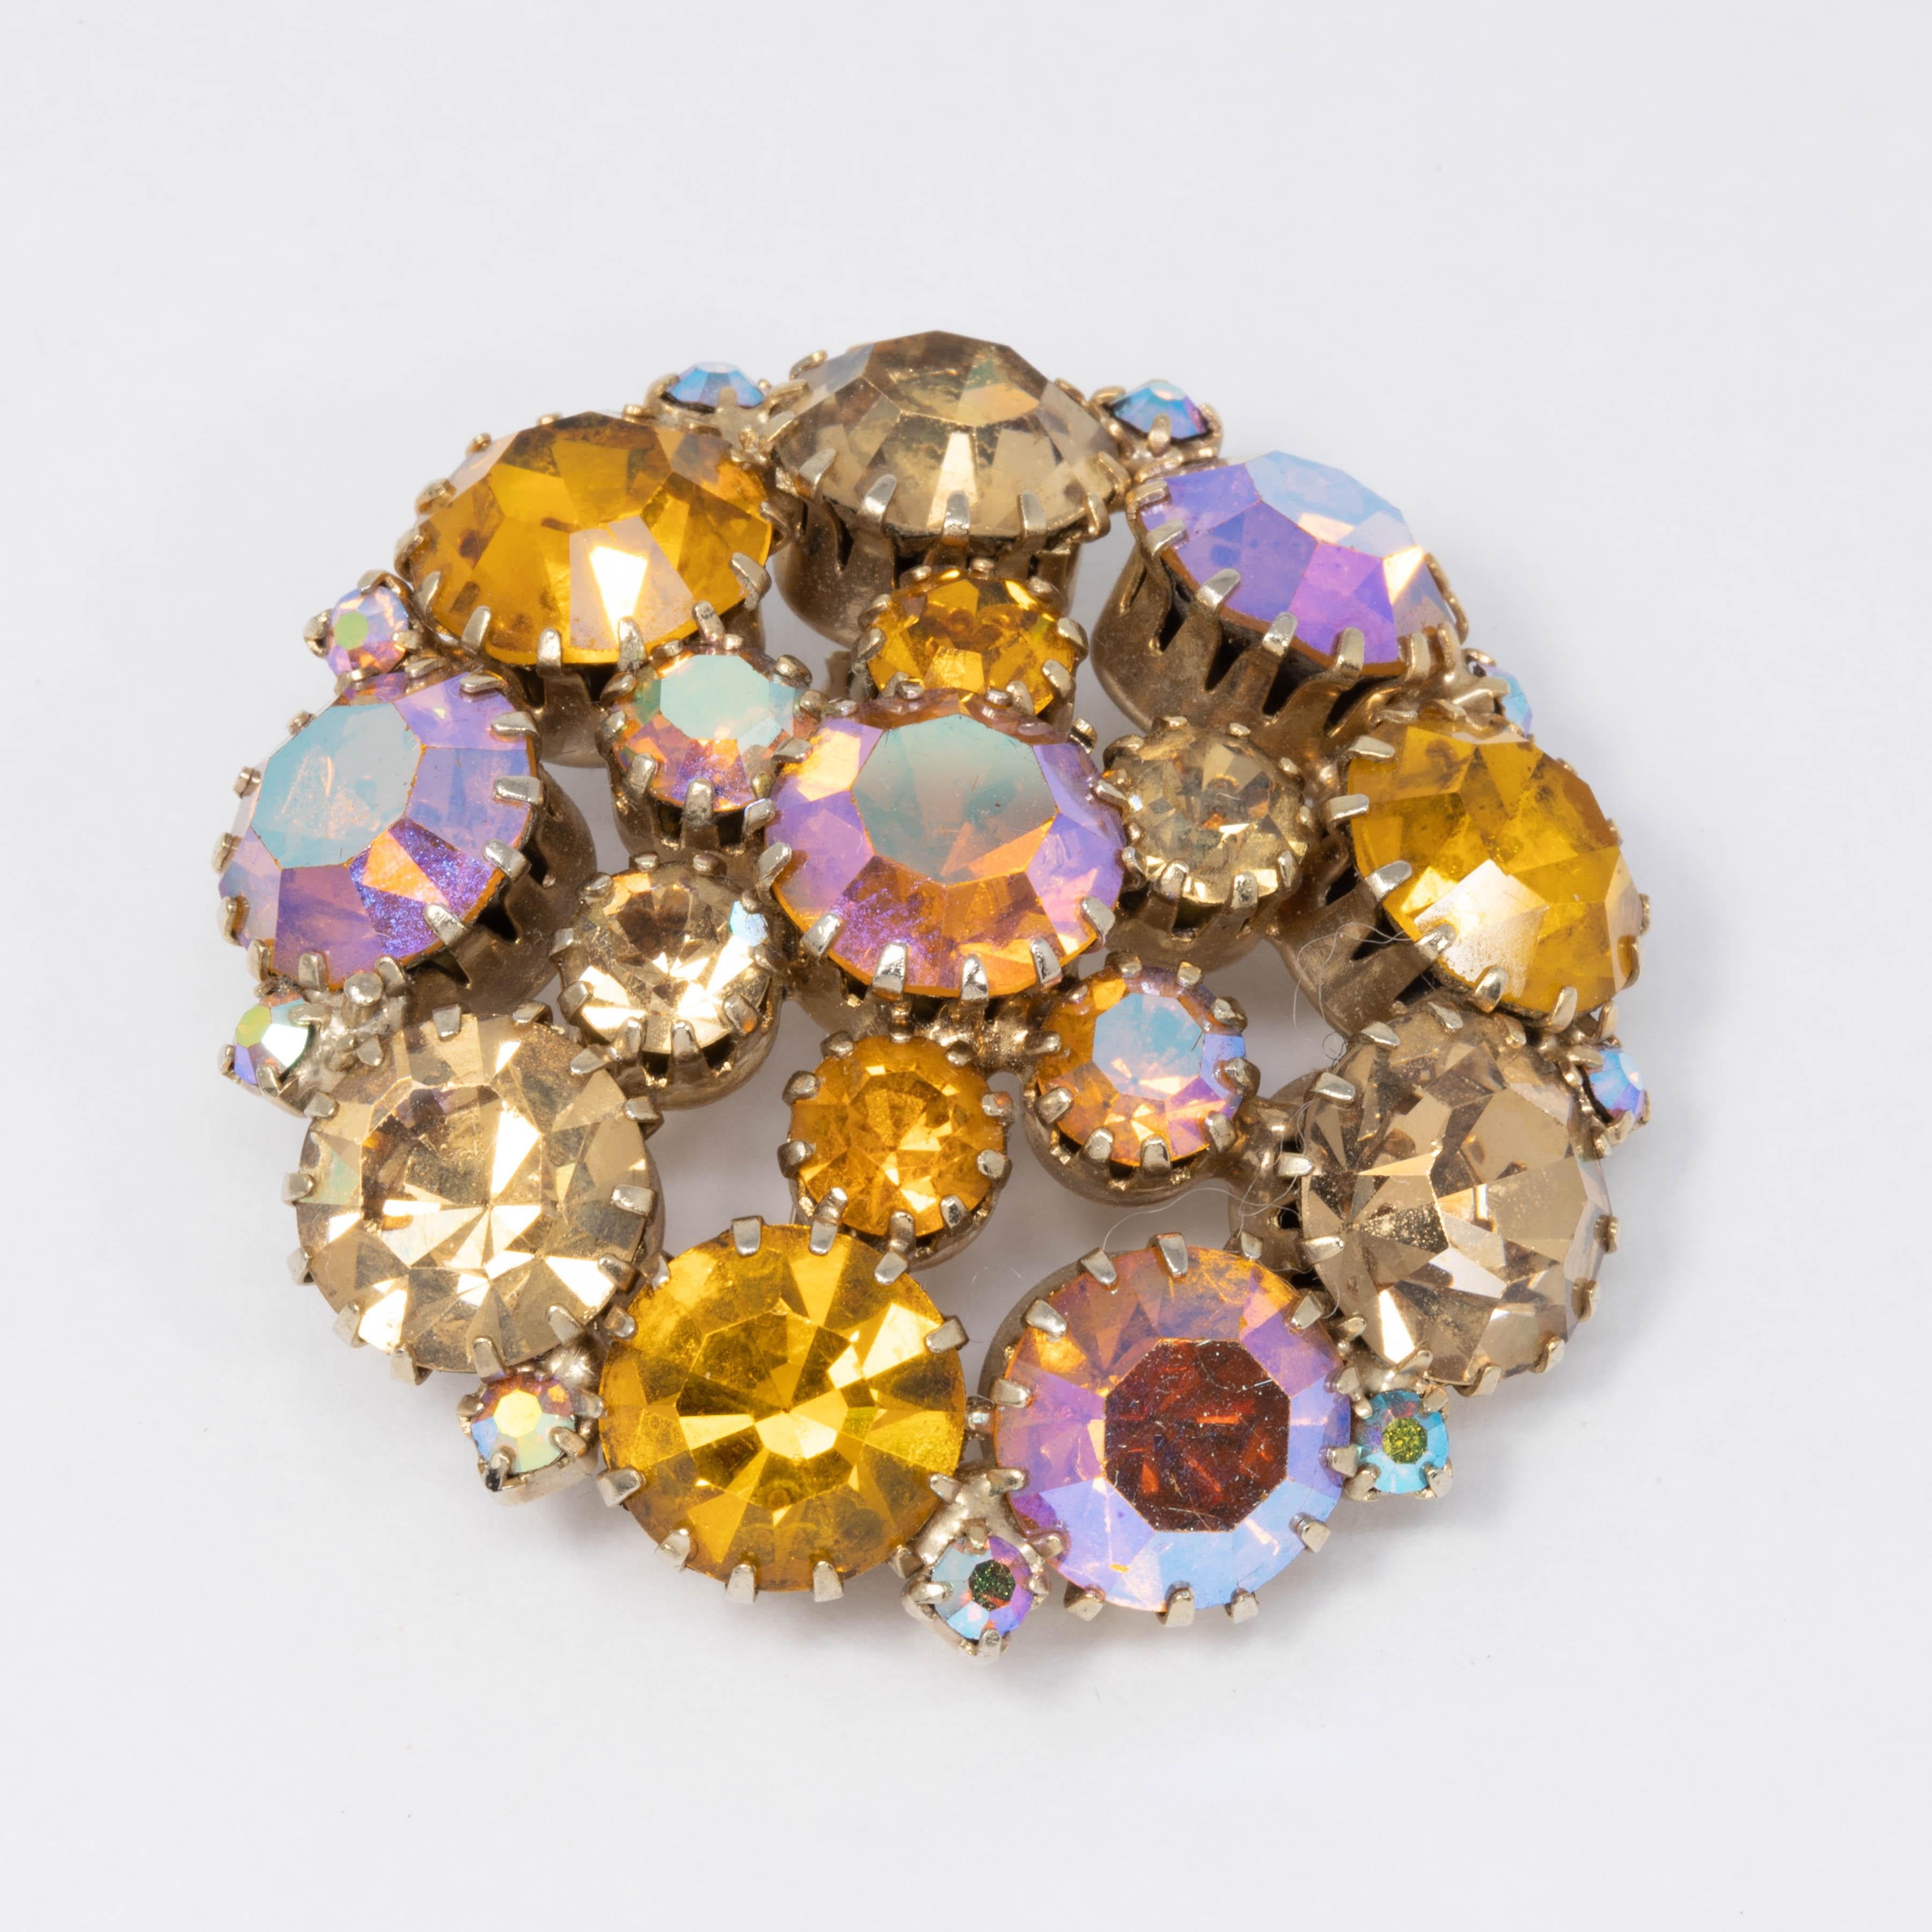 An eye-catching assortment of round-cut topaz and pink aurora borealis crystals are prong-set in this vintage goldtone pin.

The pin can swing in place a little when not fastened by the rollover mechanism, but is 100% secure.